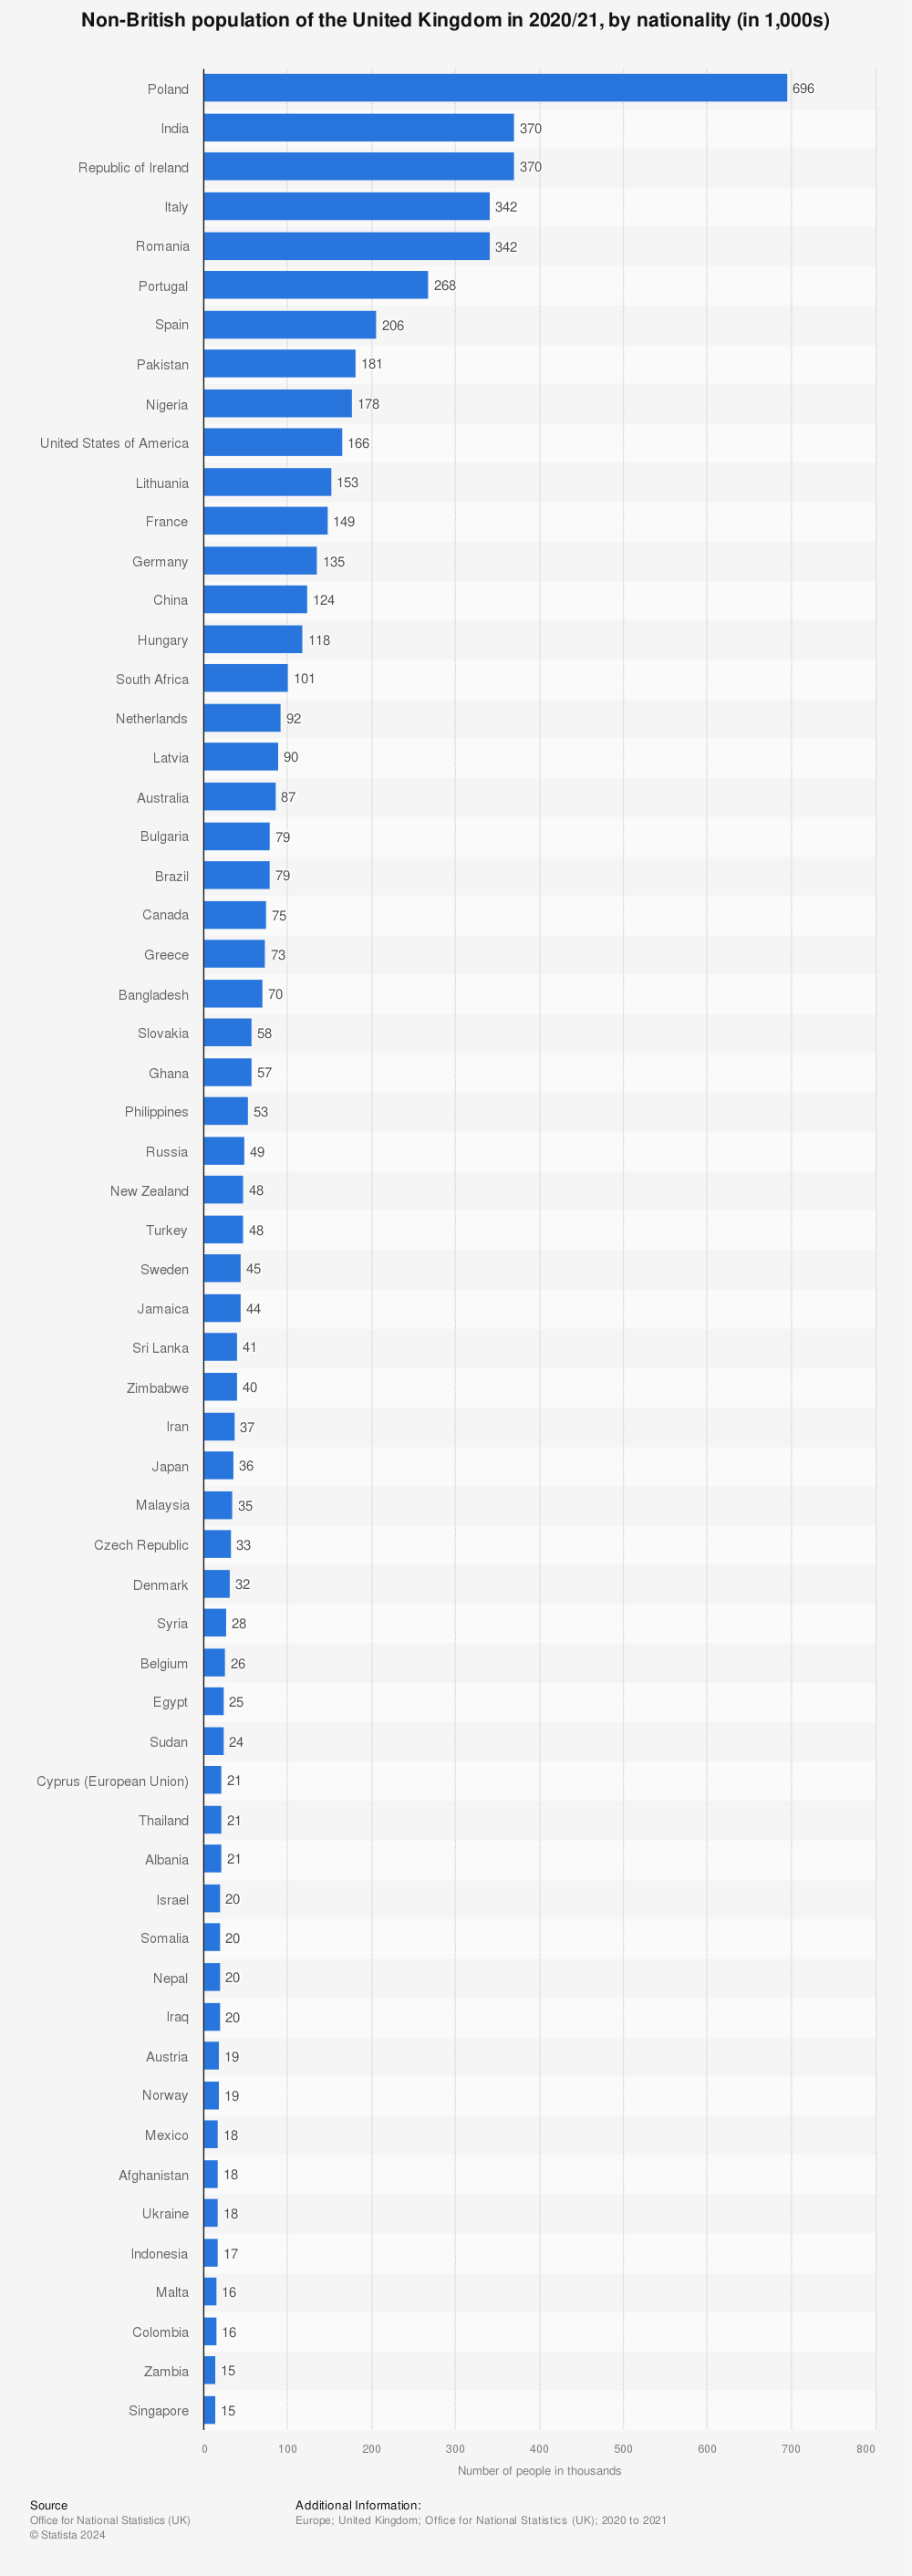 Statistic: Non-British population of the United Kingdom in 2020/21, by nationality (in 1,000s) | Statista